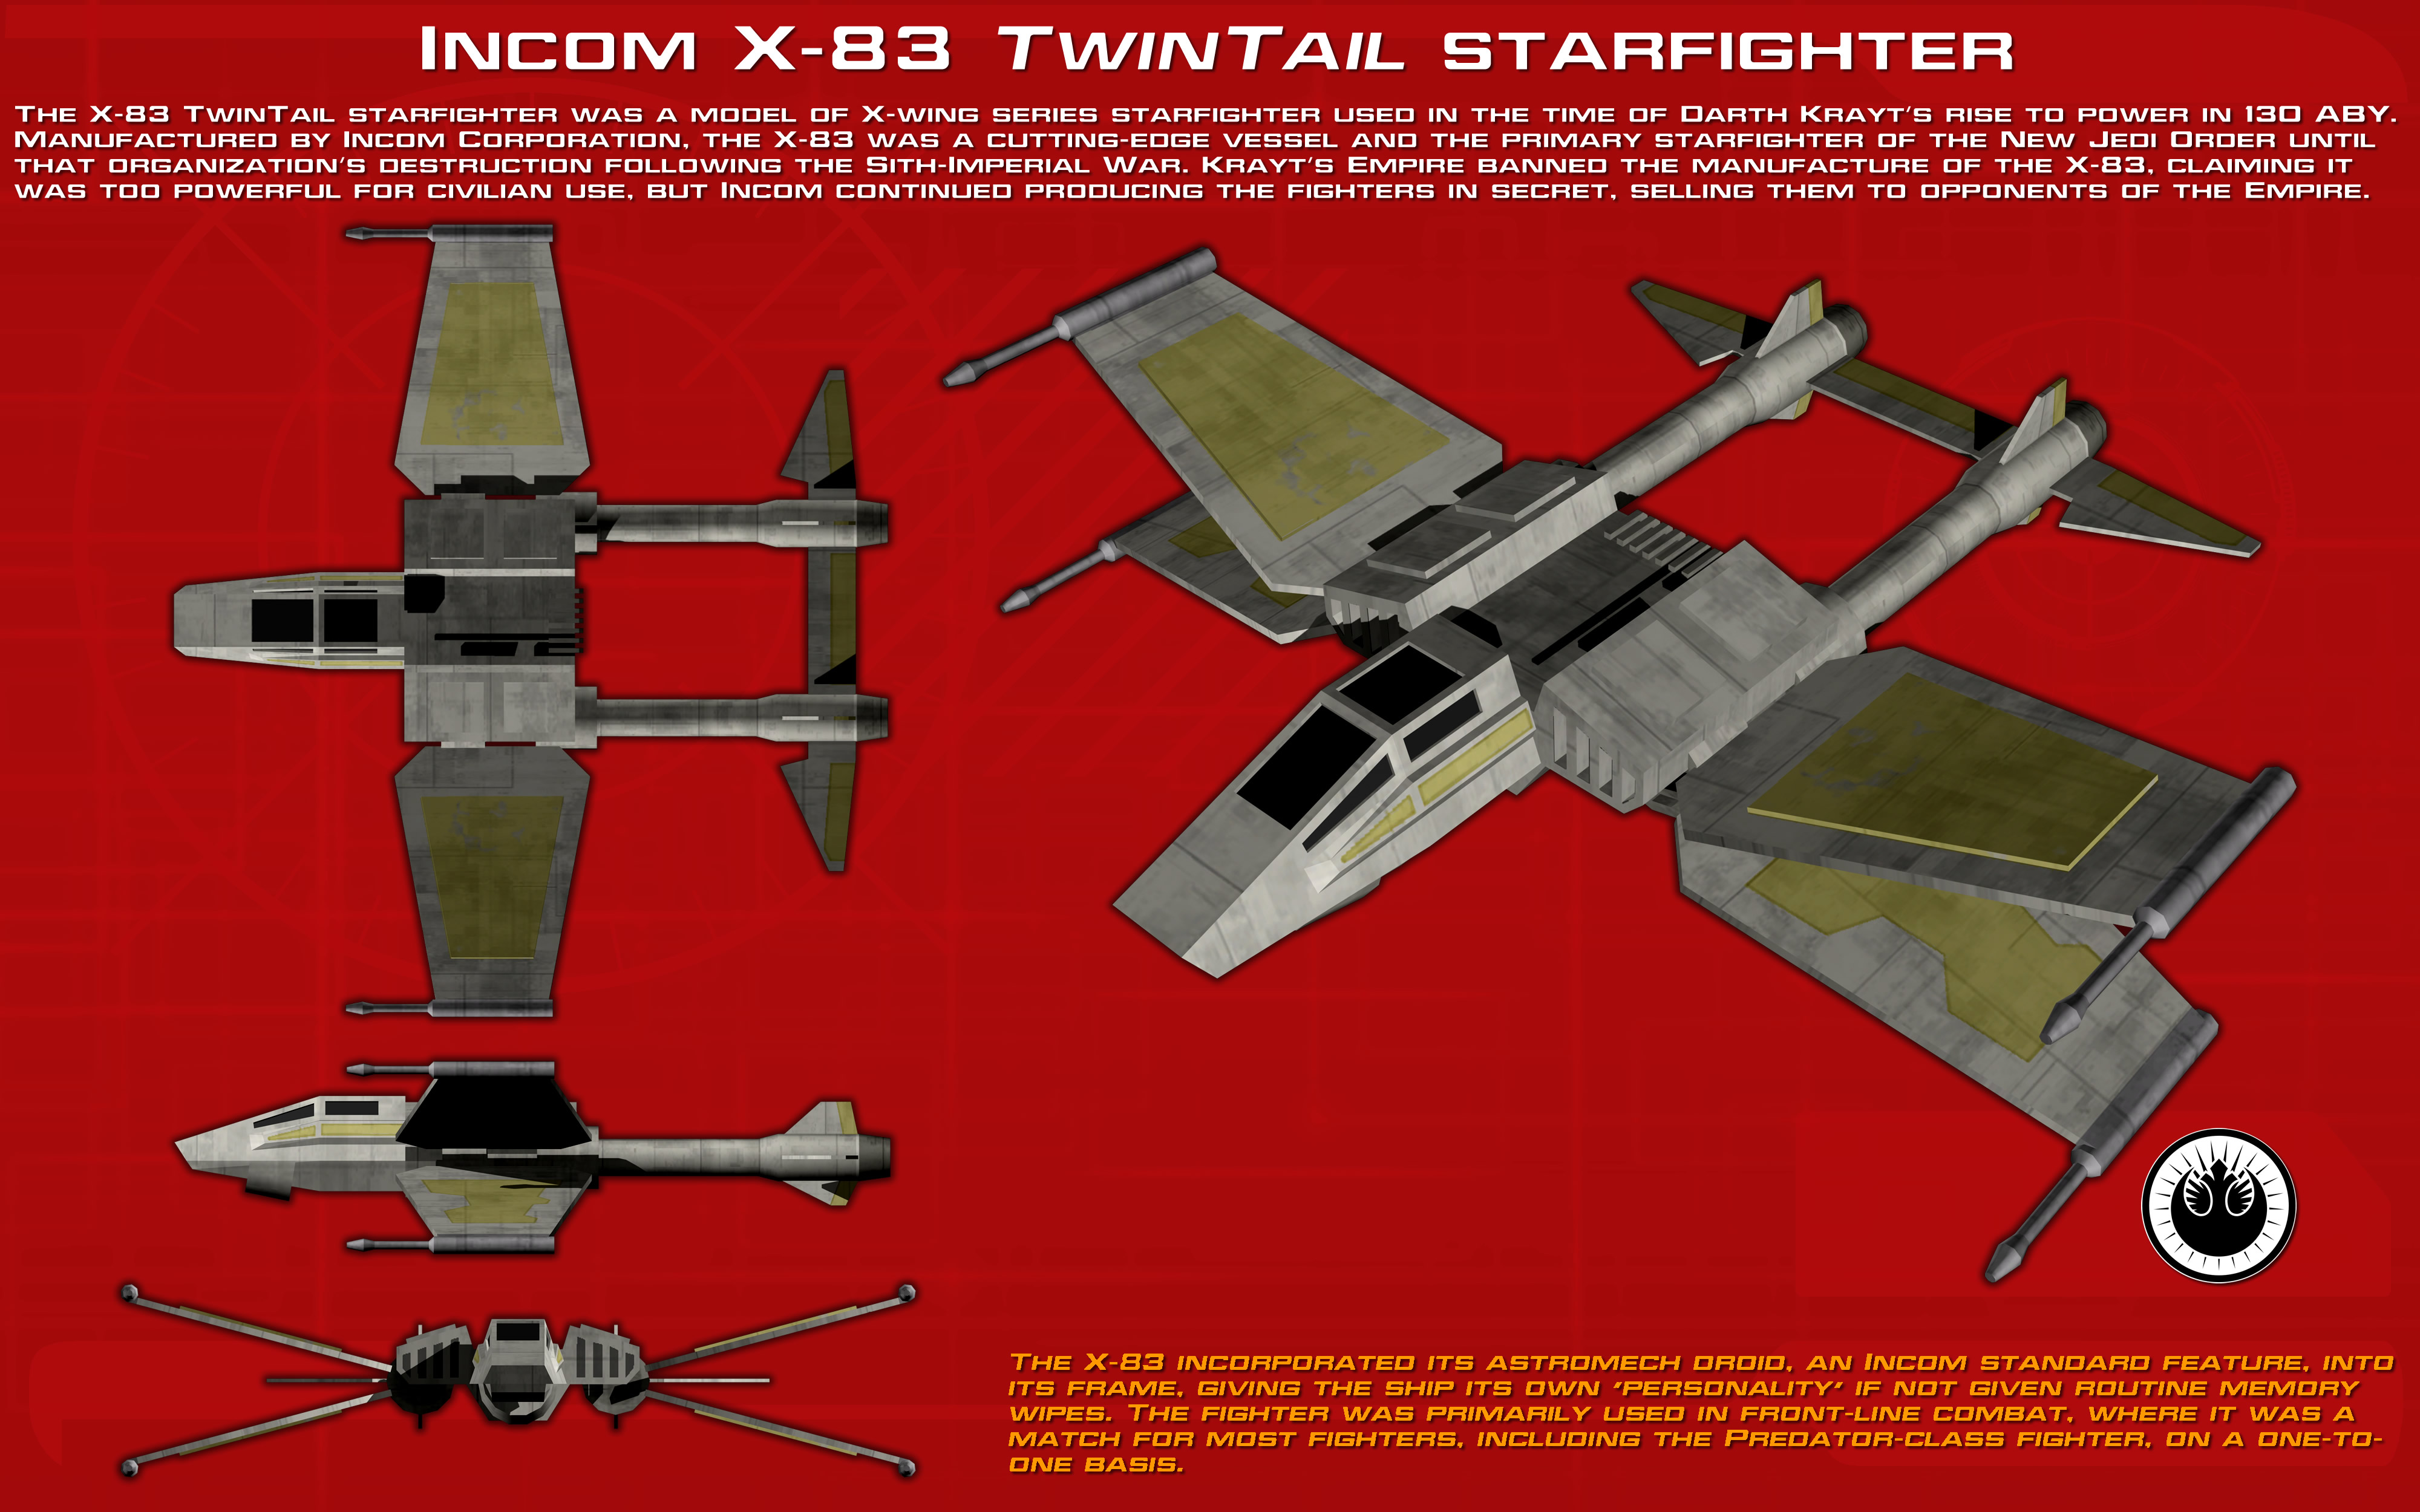 Incom X-83 Twintail starfighter ortho [New]